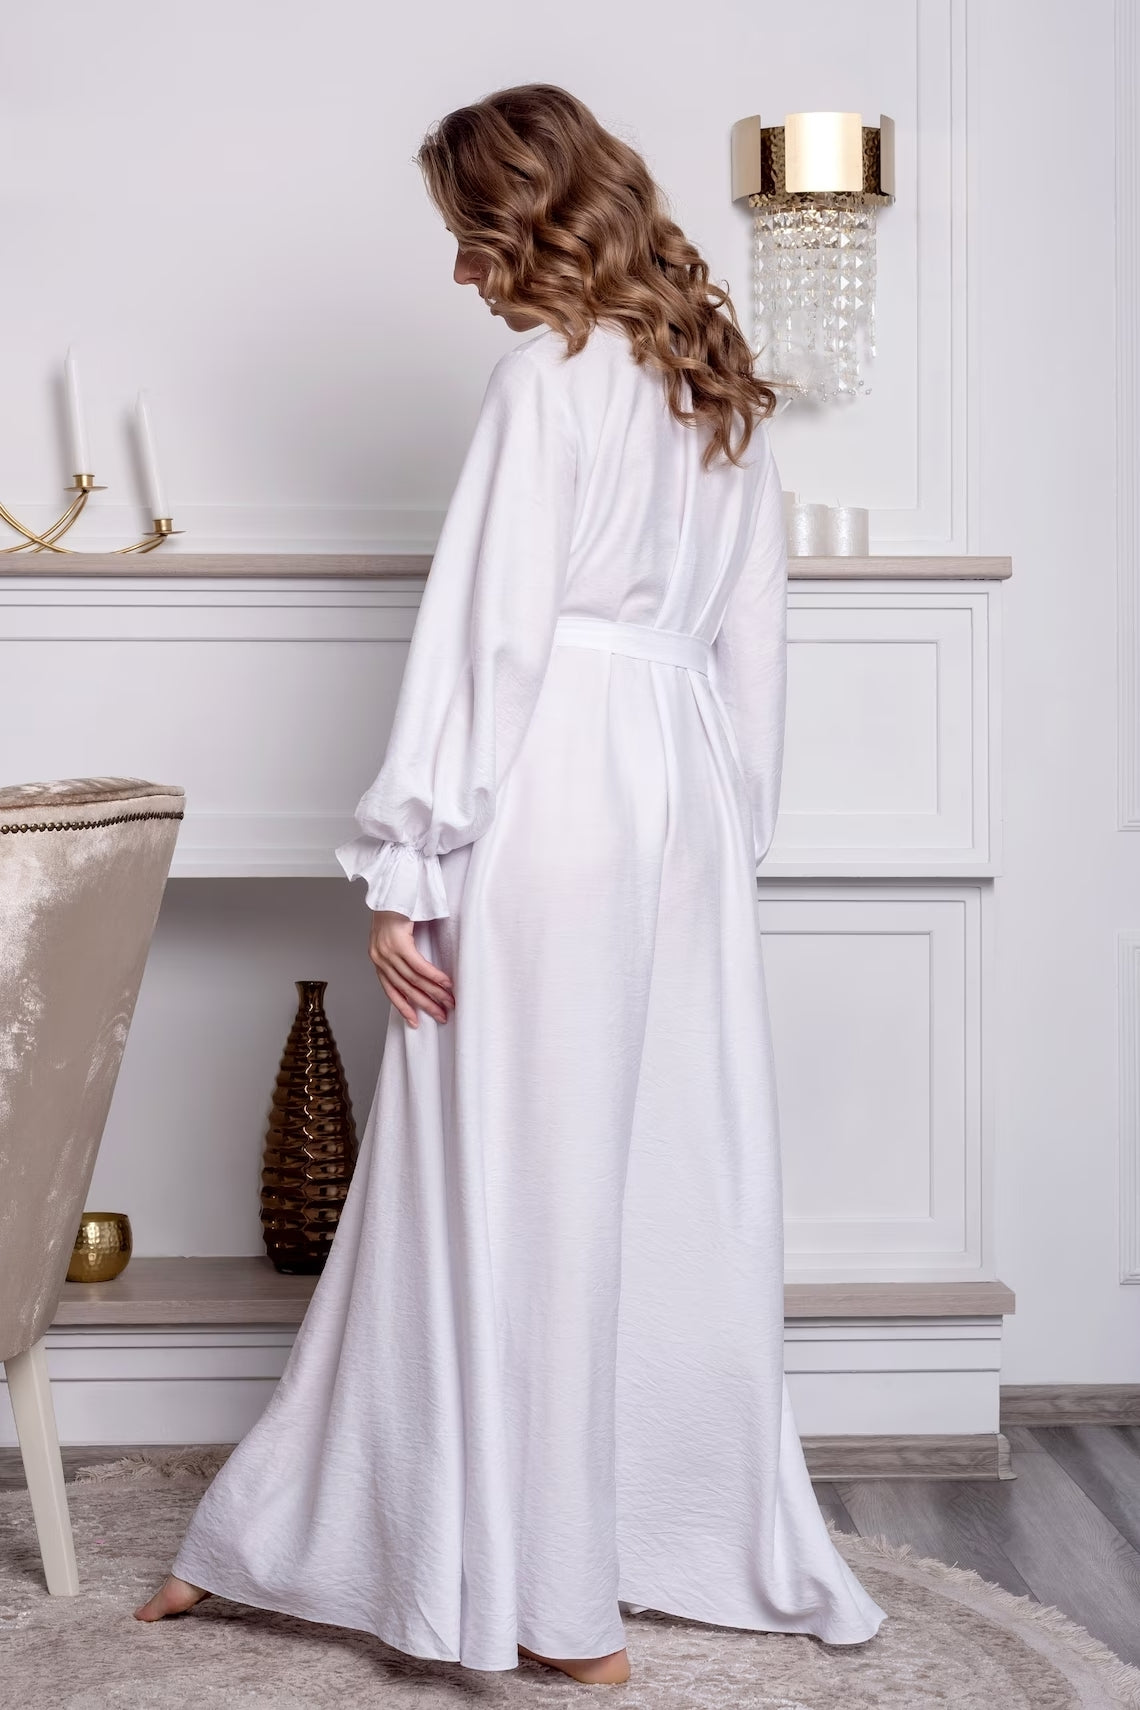 Boho Homewear Delight - Robe in White Perfection